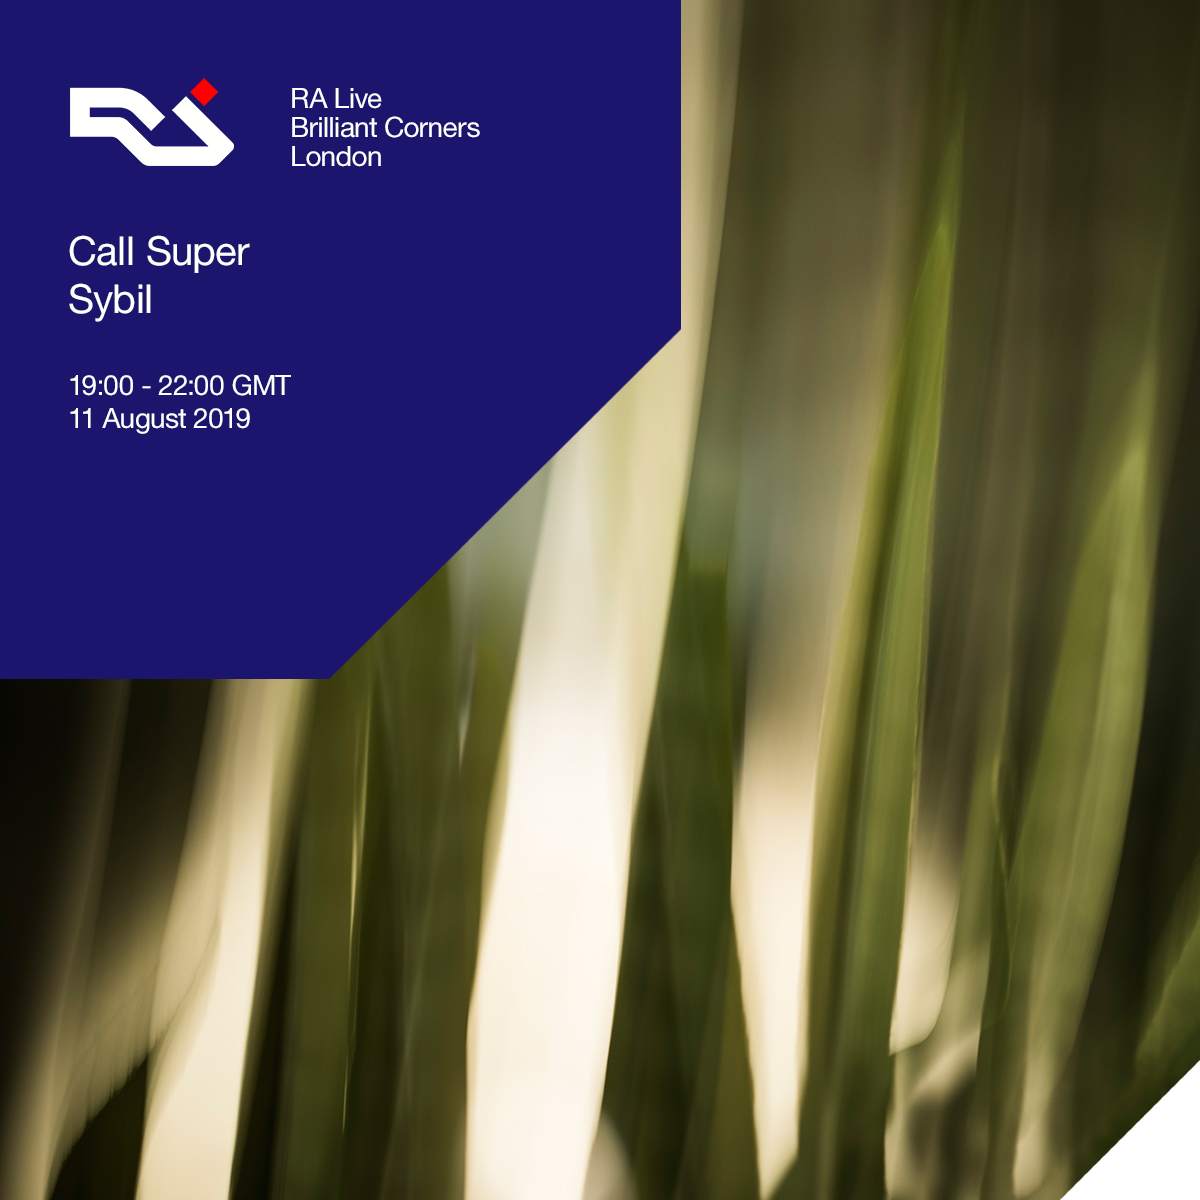 Call Super and Sybil to play RA Live at Brilliant Corners image